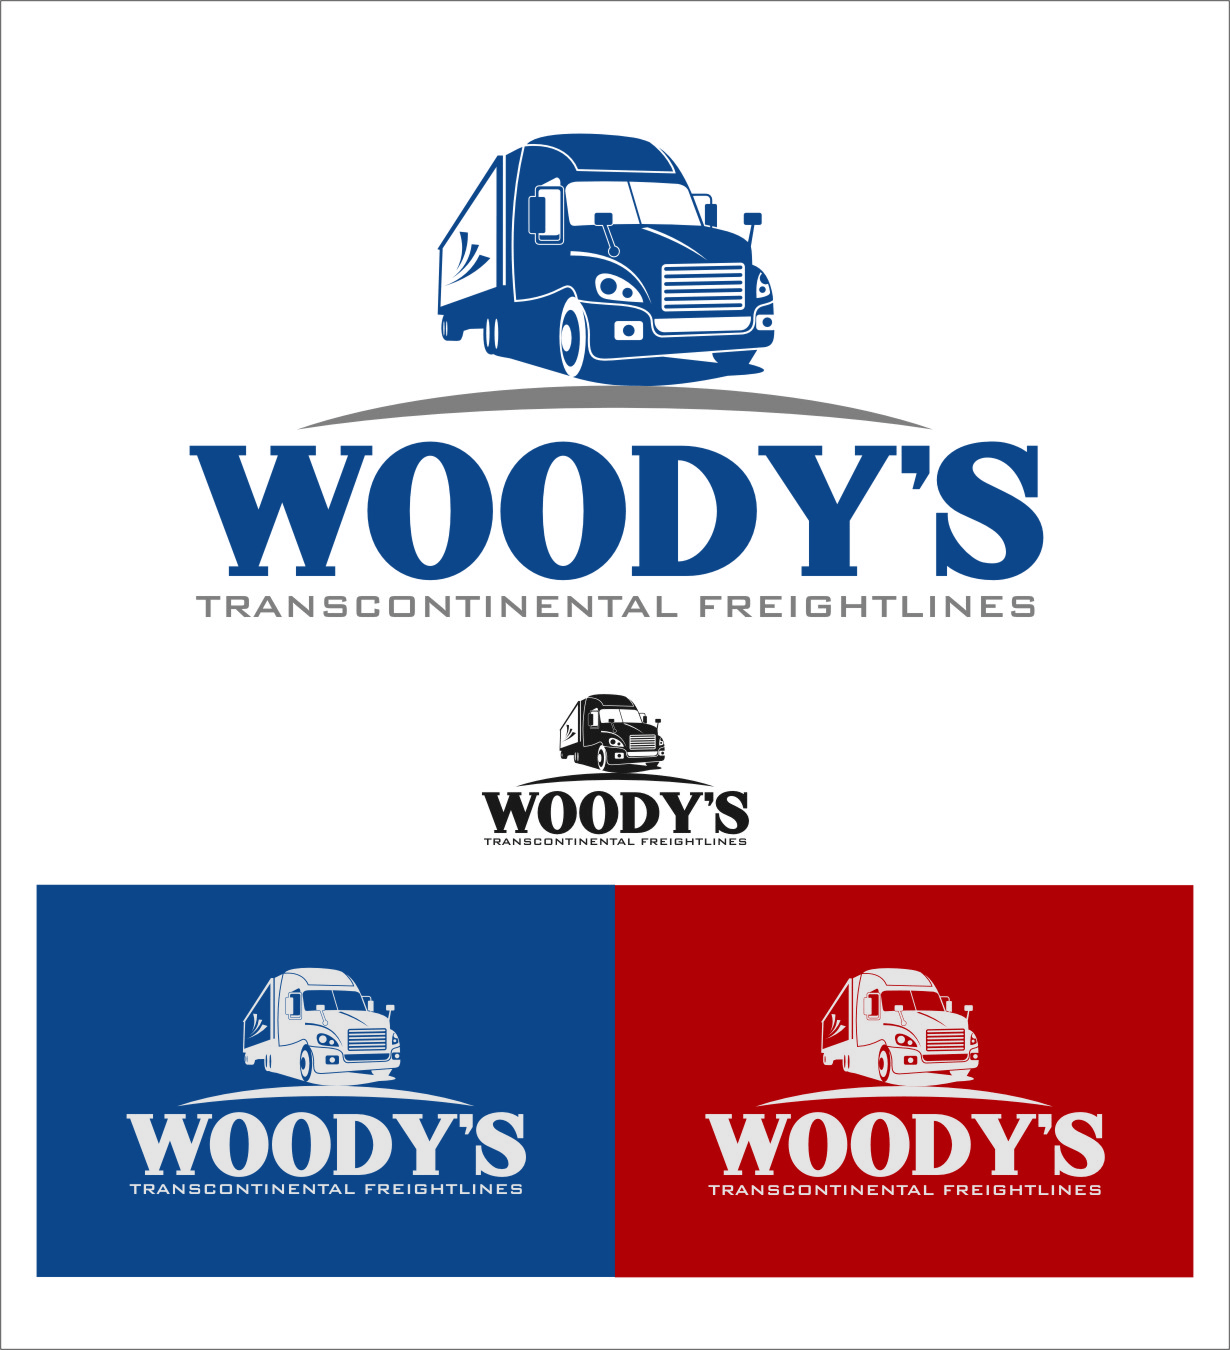 Cool Trucking Company Logo - Logo Design Contests Creative Logo Design for Woody's